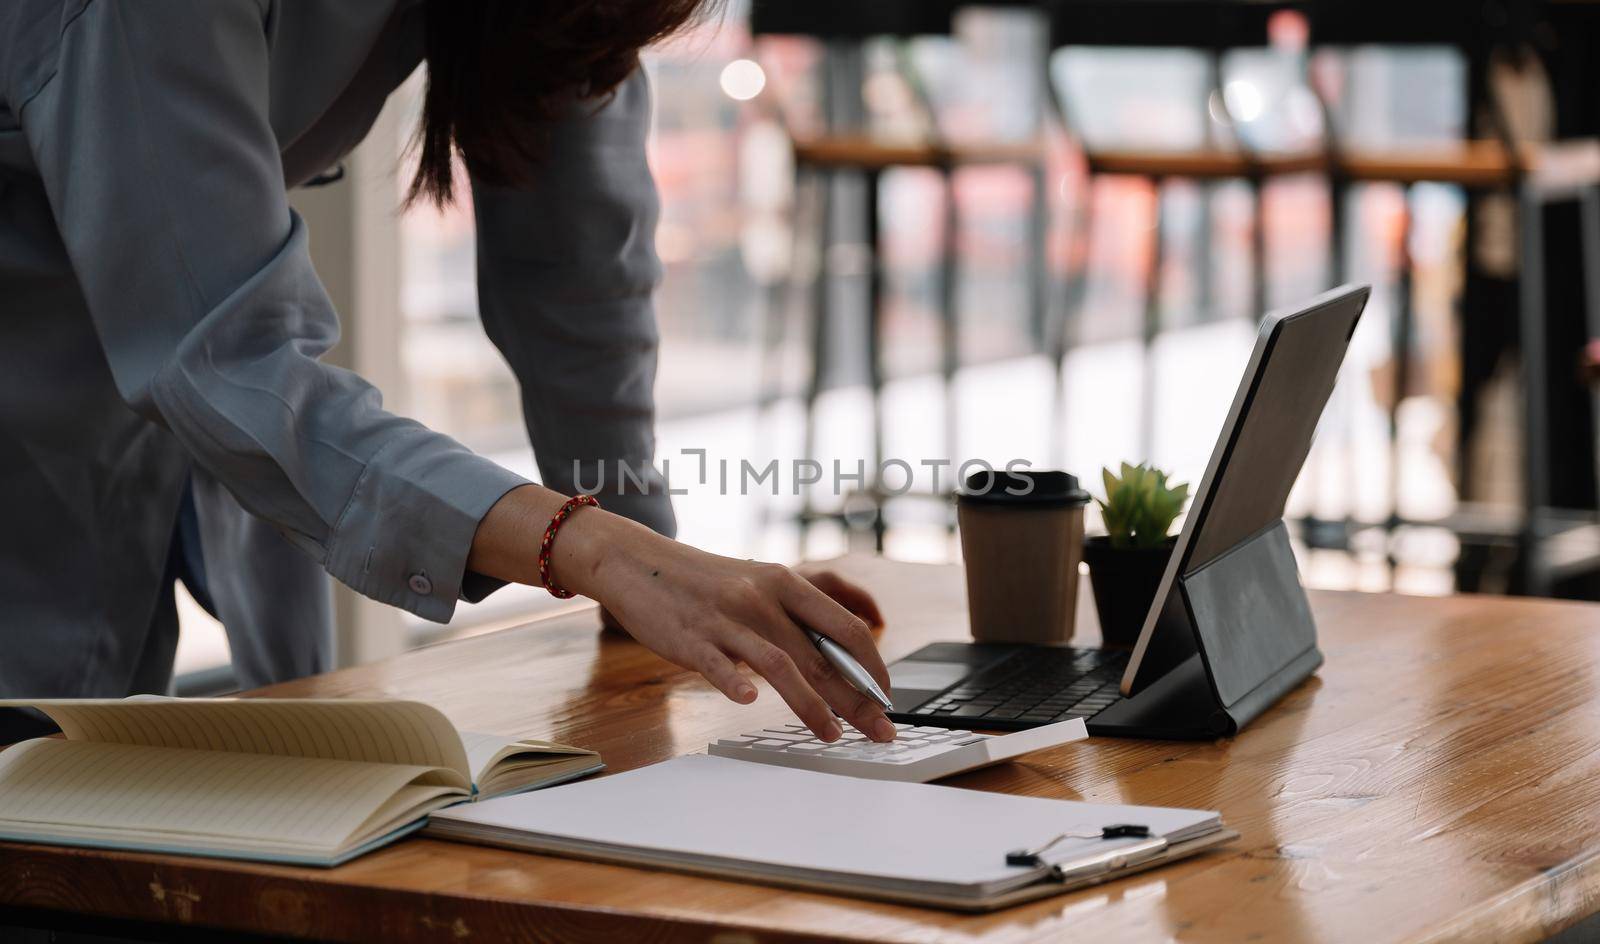 businesswoman working on desk office with using a calculator to calculate the numbers, finance accounting concept